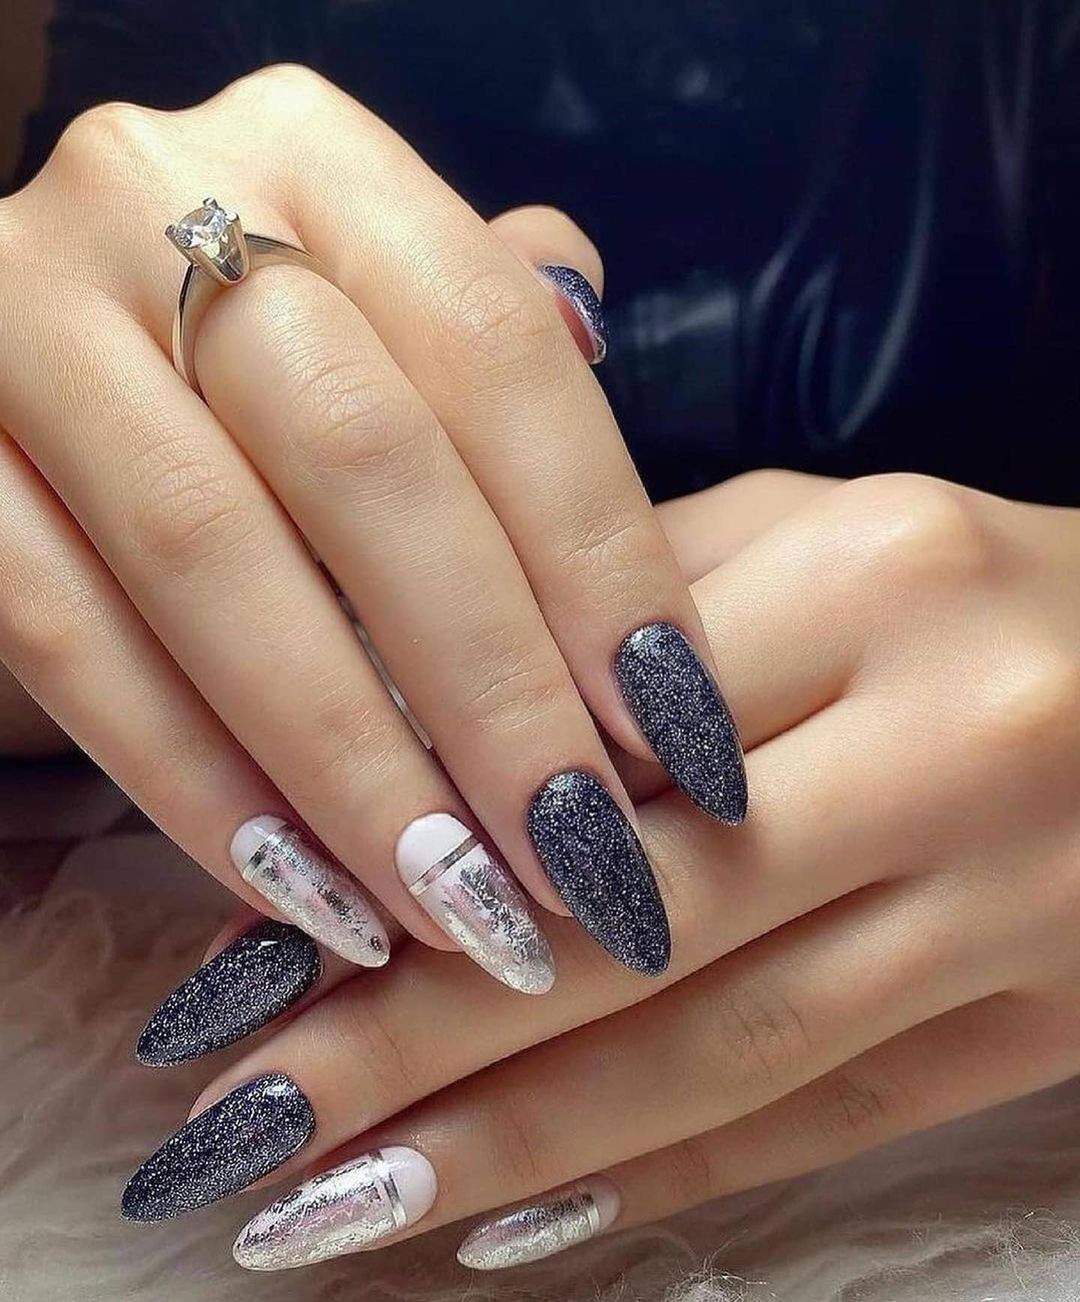 35 Cute Summer Nails To Rock For Women In 2021 images 4